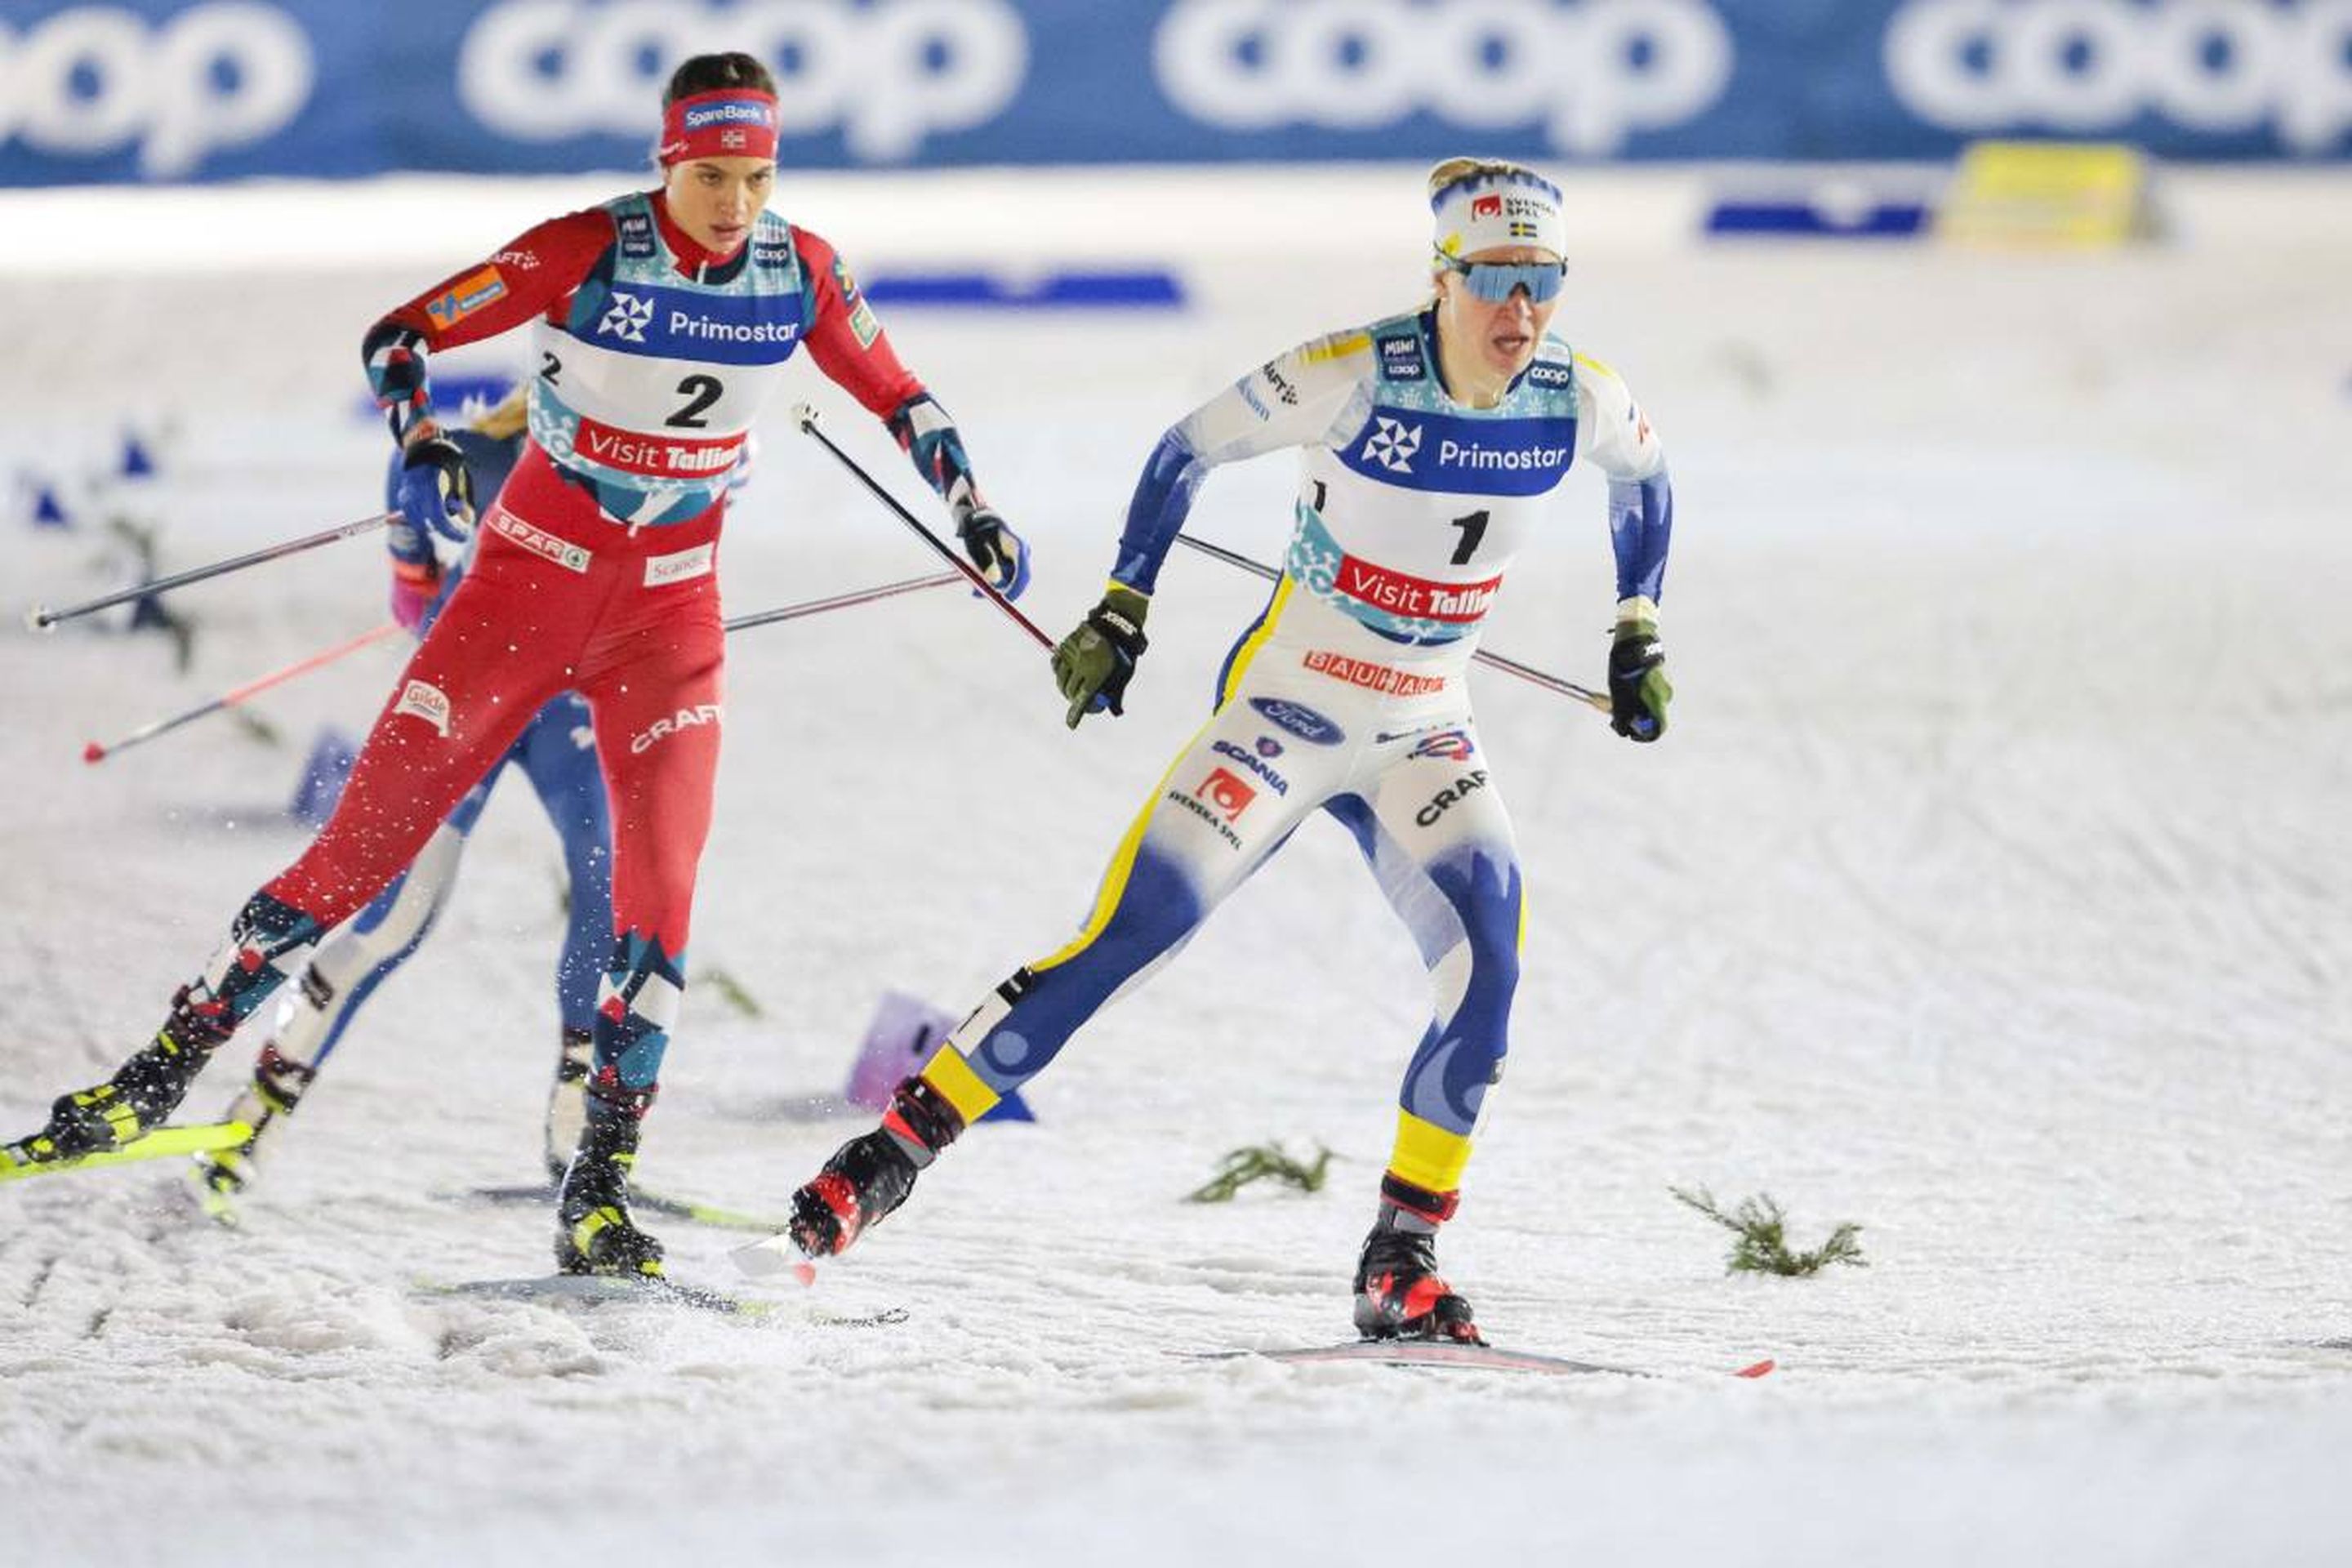 Women's sprint winner, Kristine Stavaas Skistad from Norway, chasing Olympic champion Jonna Sundling from Sweden, who had to settle for a second place: @Nordic Focus.